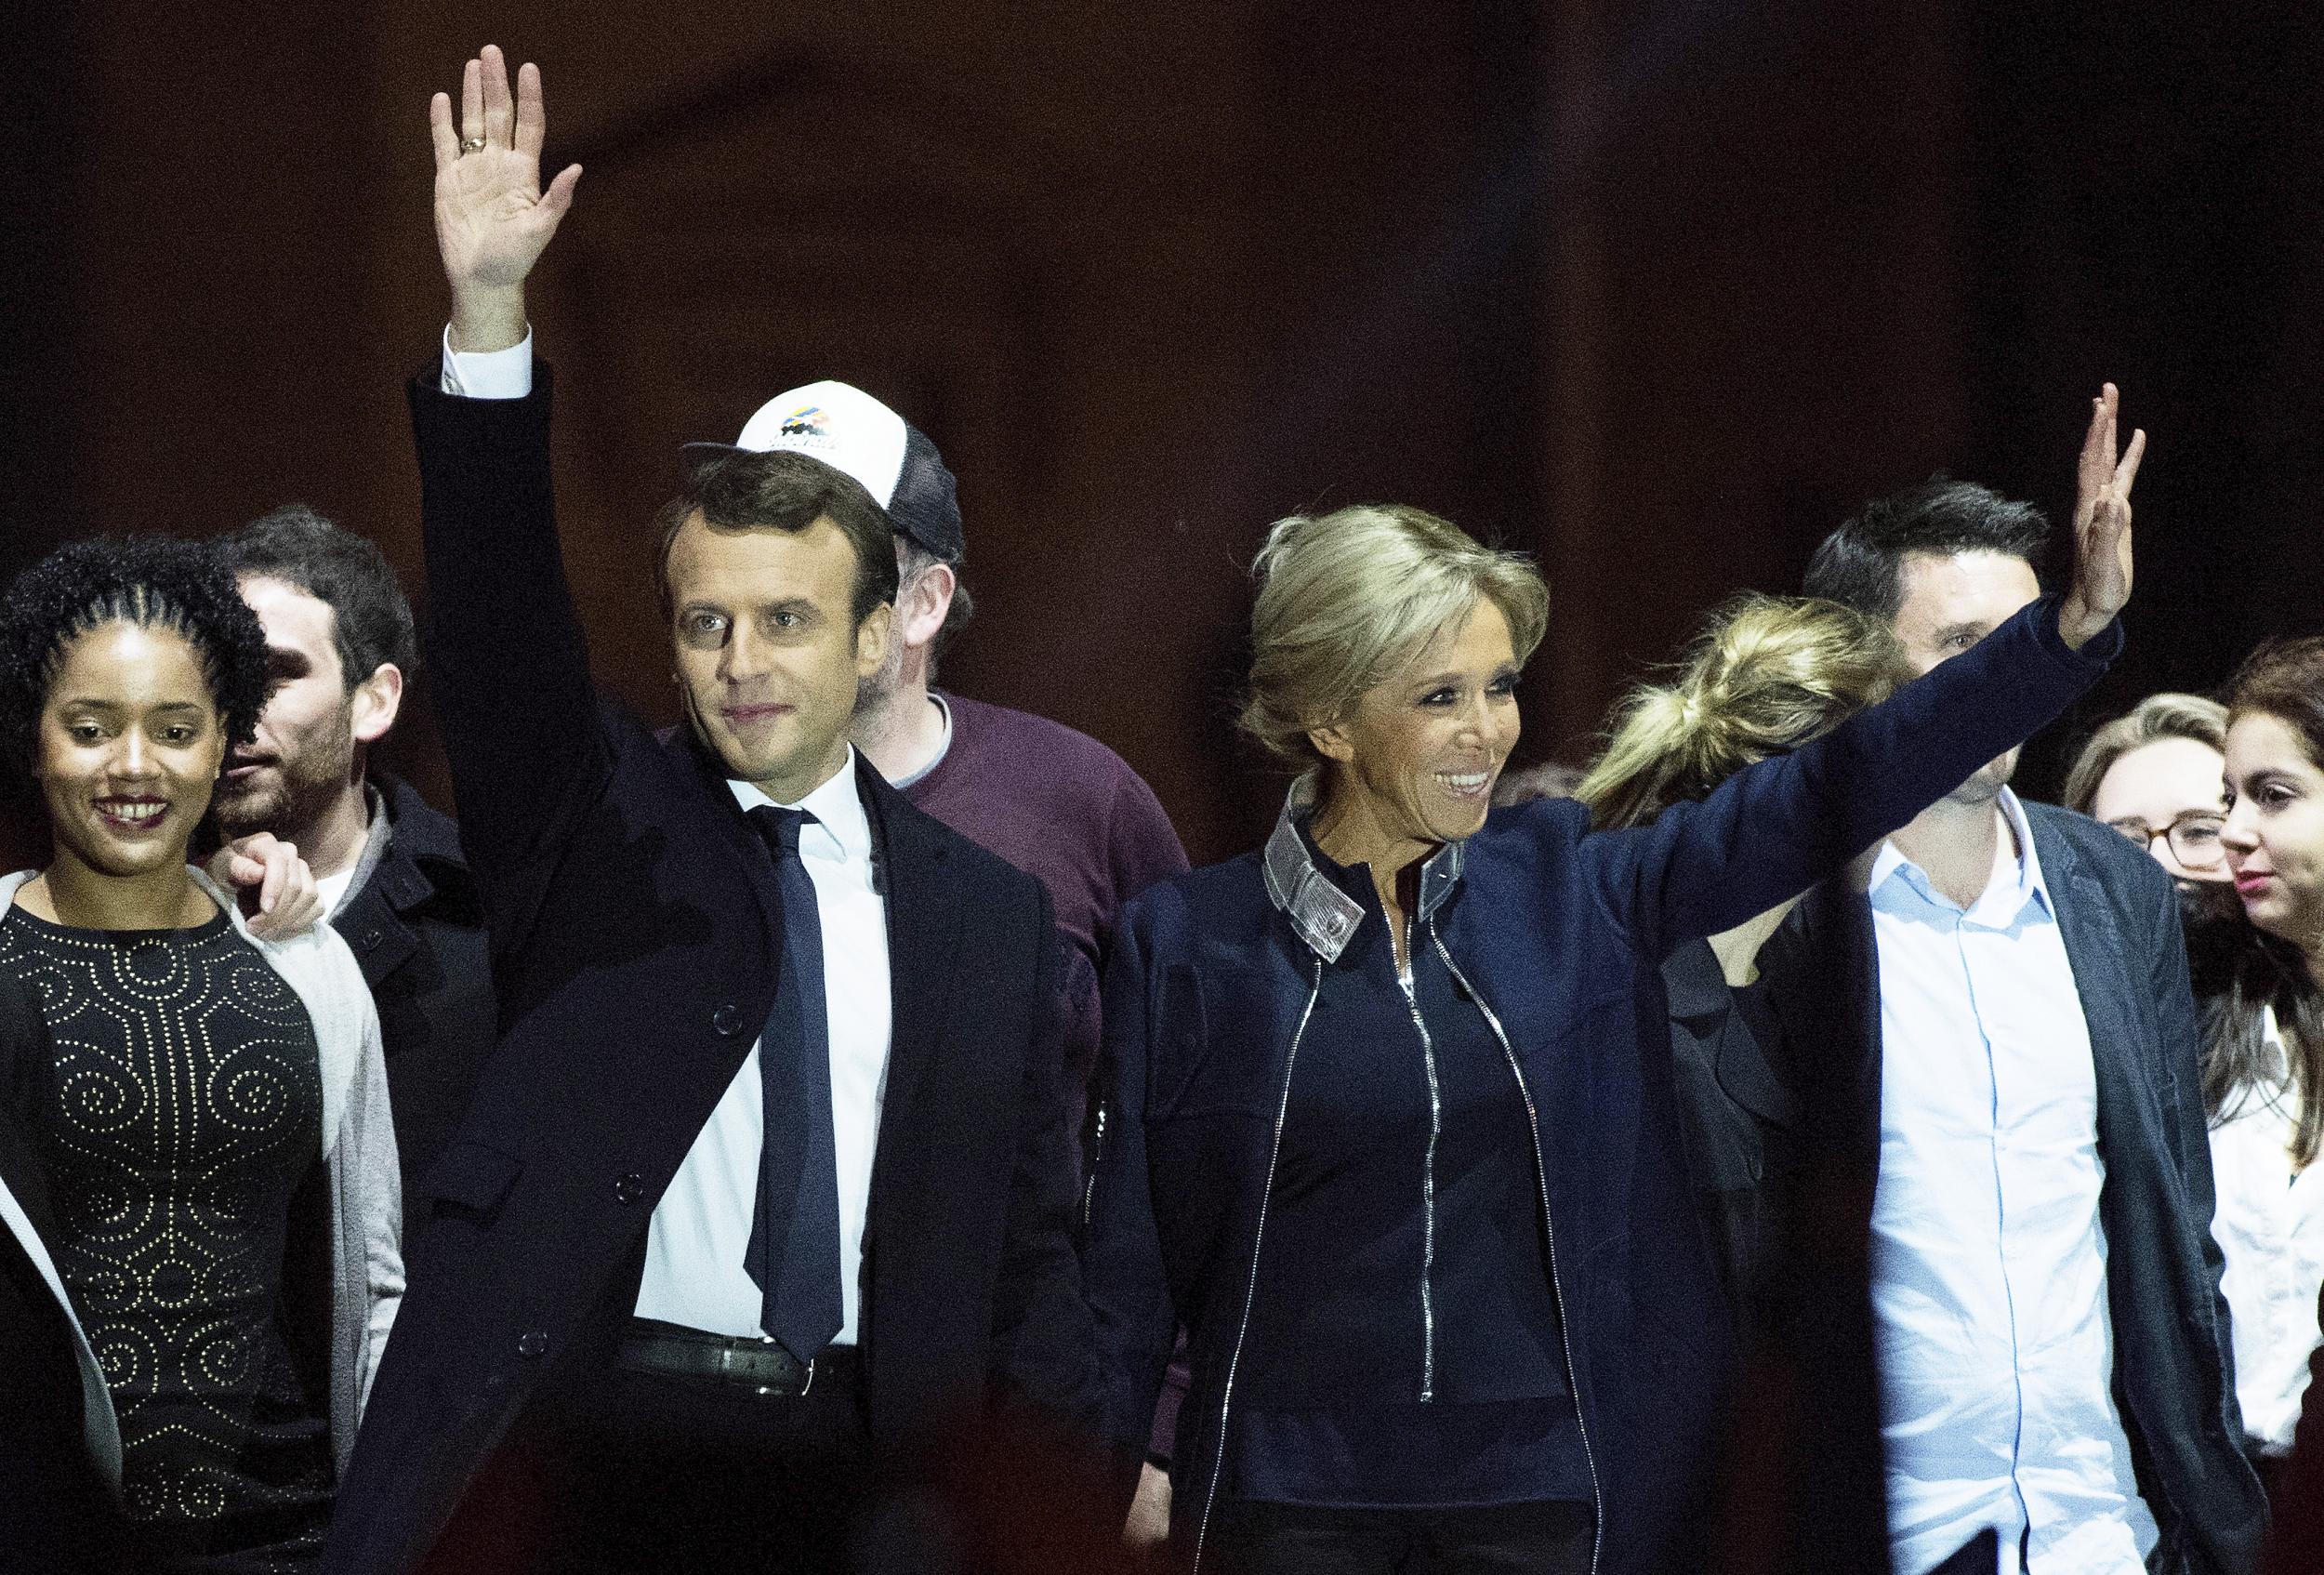 Emmanuel Macron waves to supporters with wife Brigitte after winning the French Presidential Election